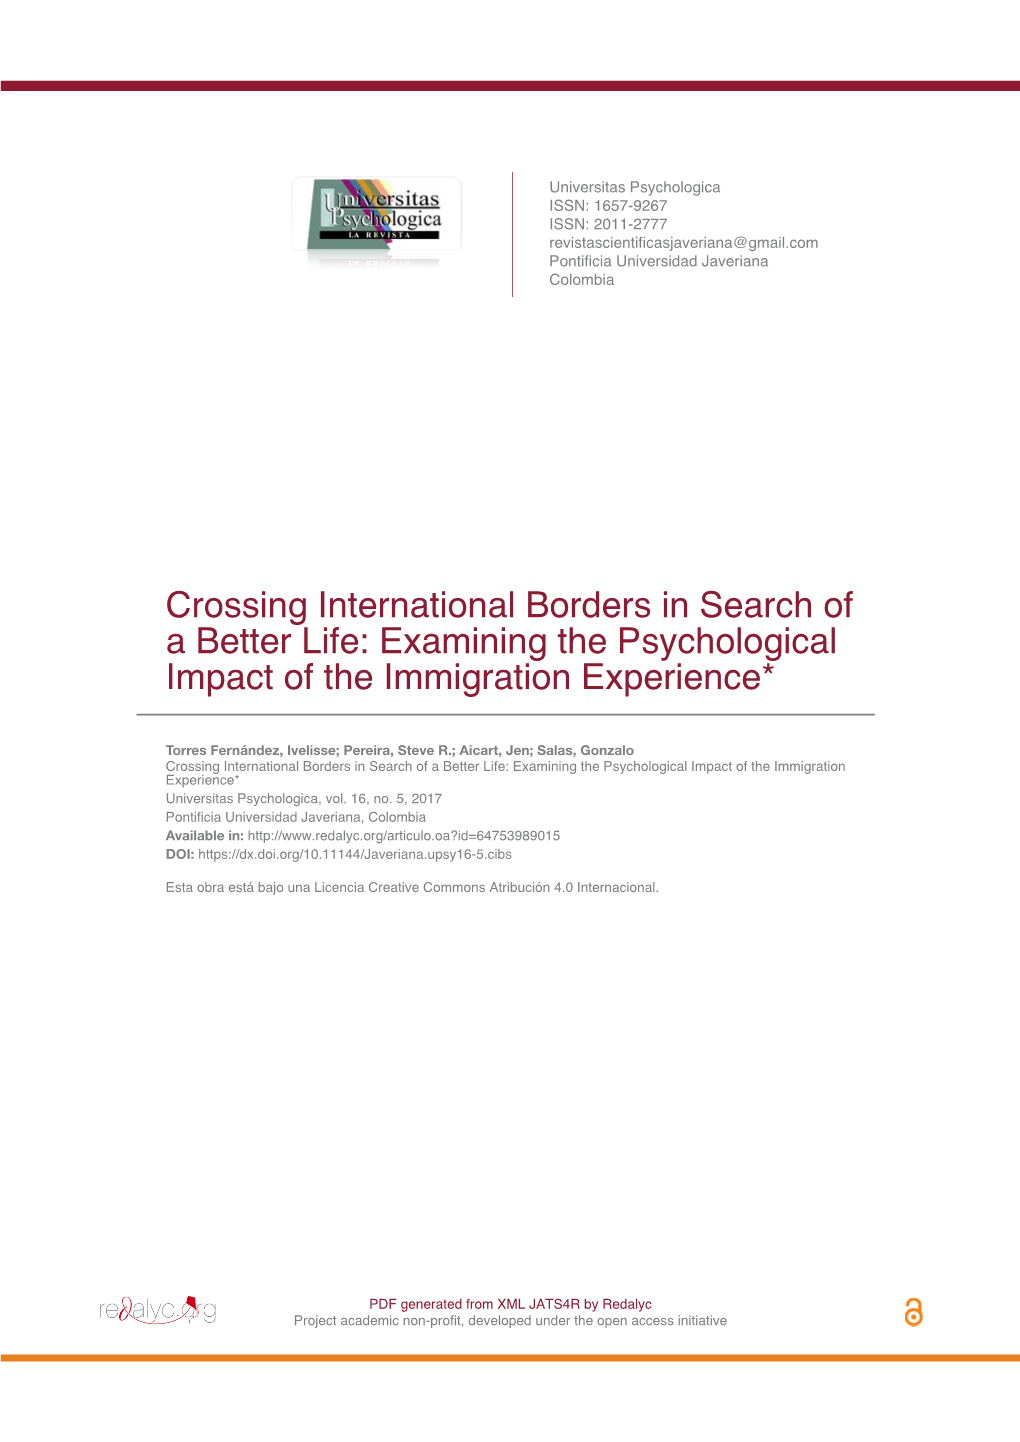 Crossing International Borders in Search of a Better Life: Examining the Psychological Impact of the Immigration Experience*